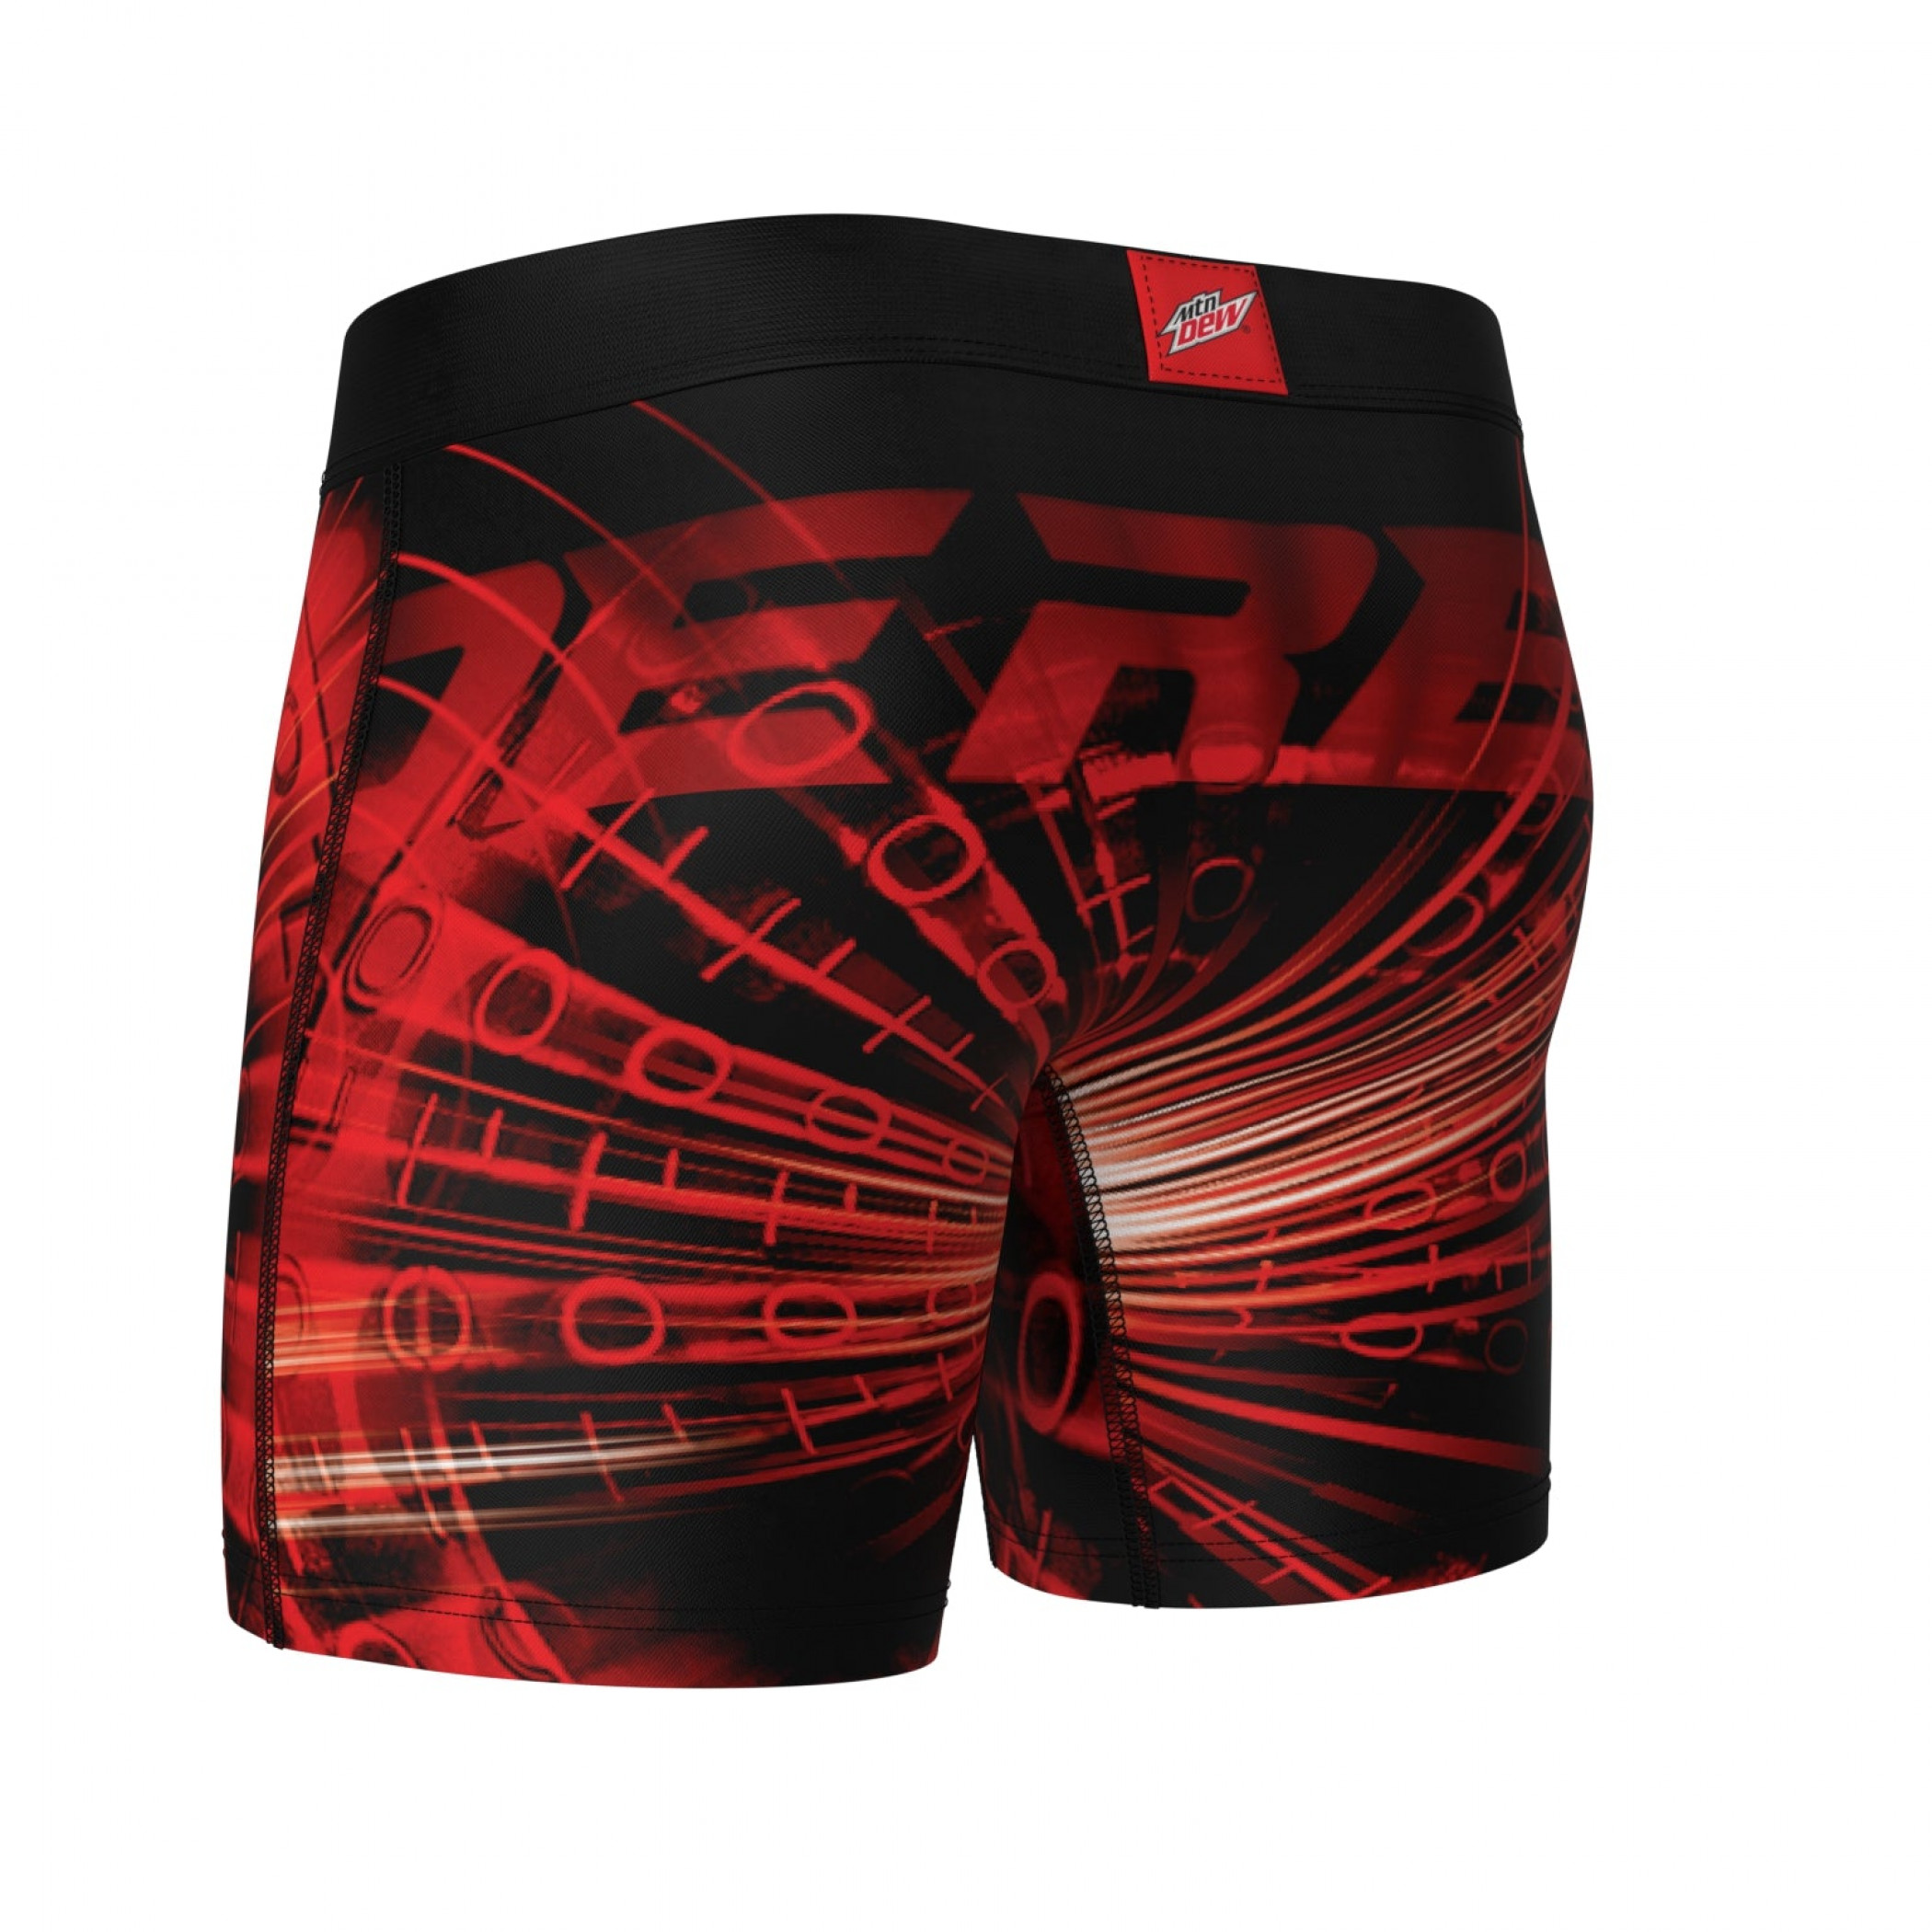 Mountain Dew Code Red Swag Boxer Briefs